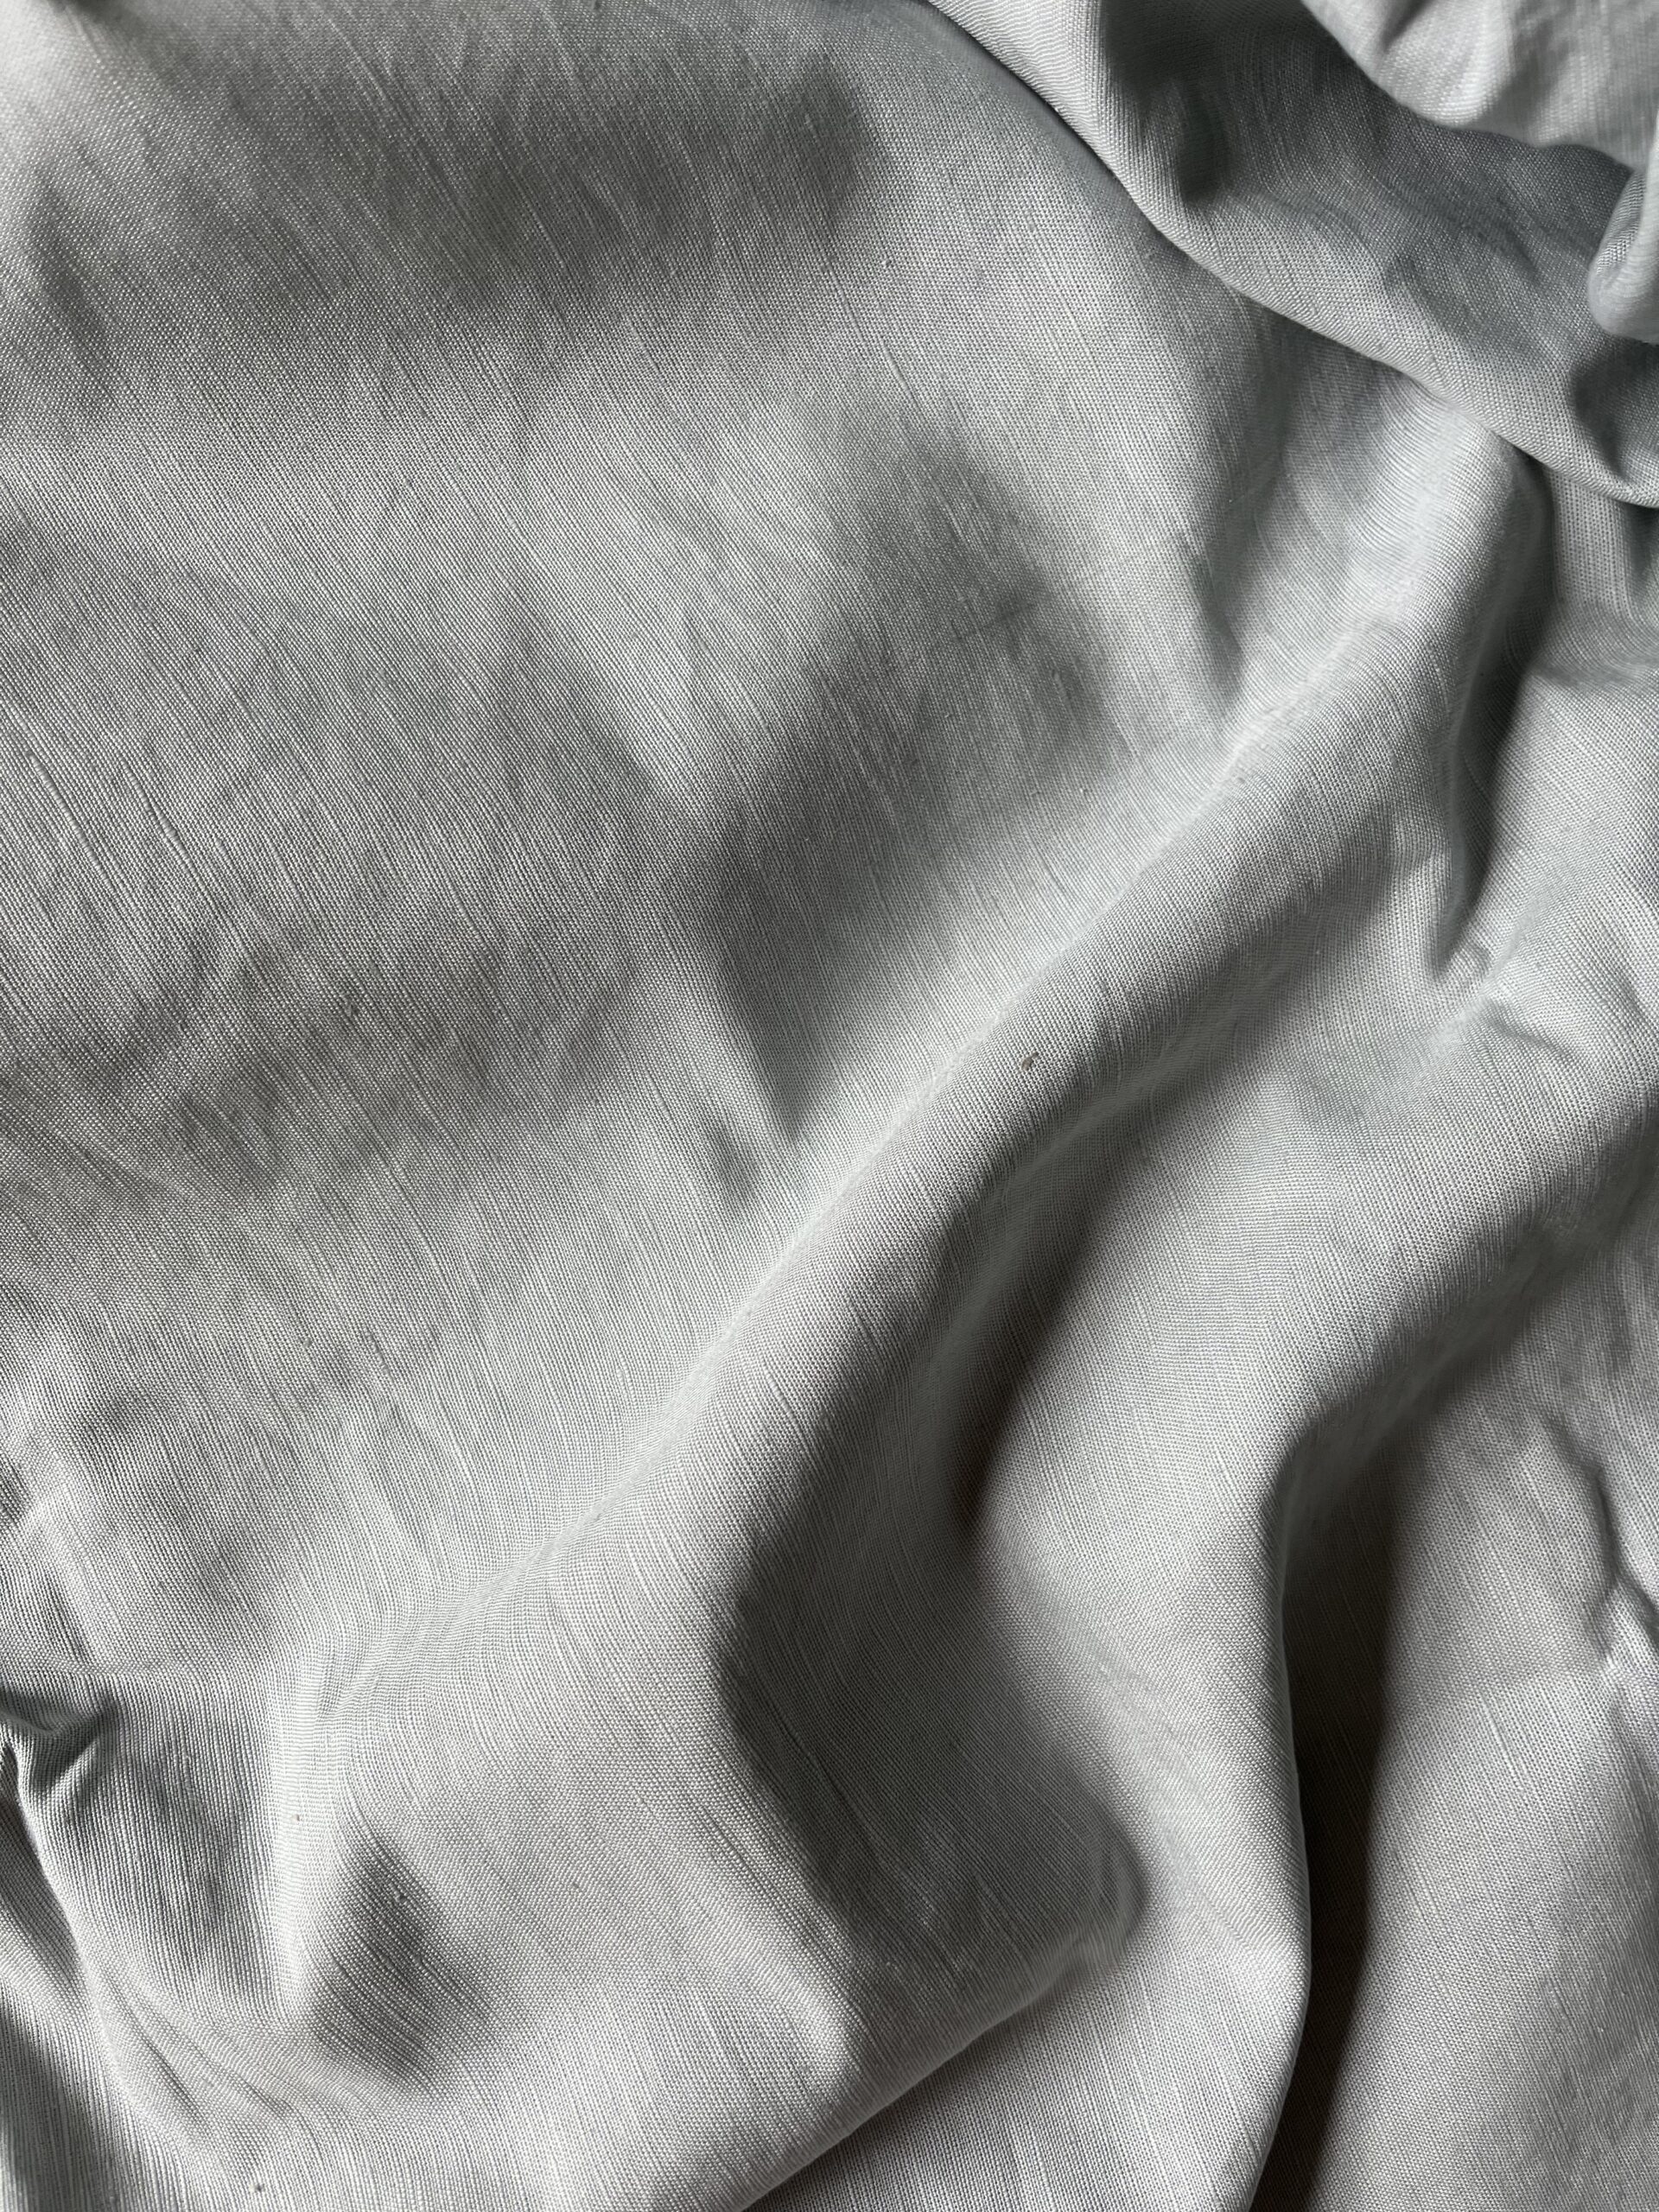 A close-up view of wrinkled, light gray fabric.